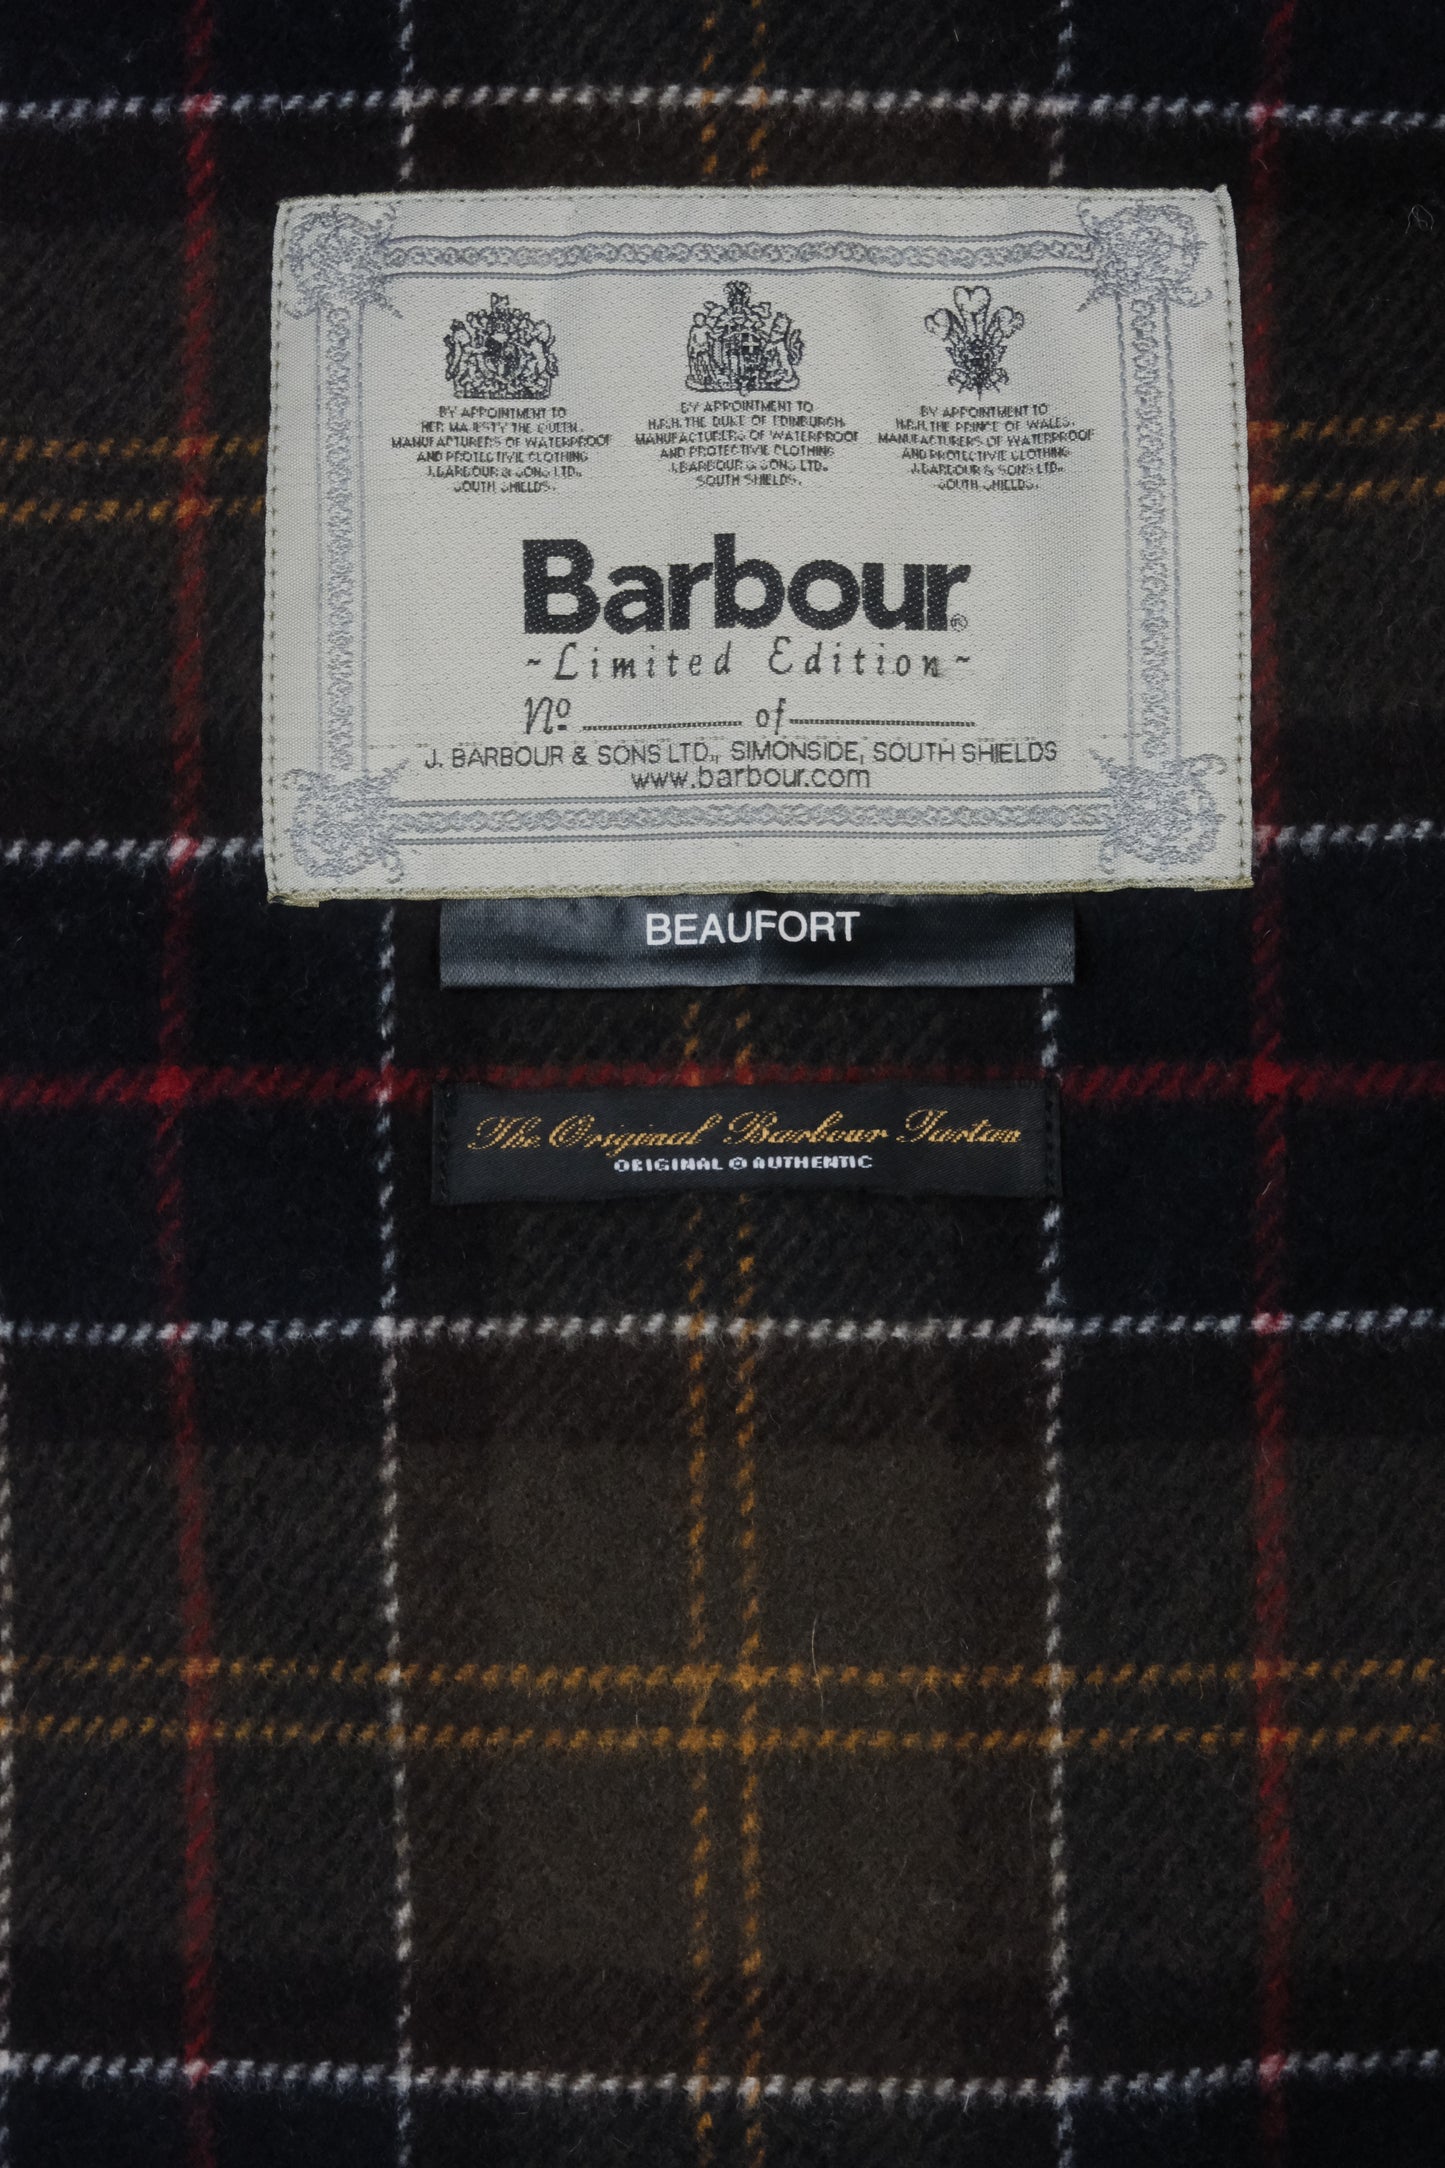 Barbour Beaufort Leather Jacket w/ Wool Lining Limited Edition 'M' - vintage clothing clochard92.com